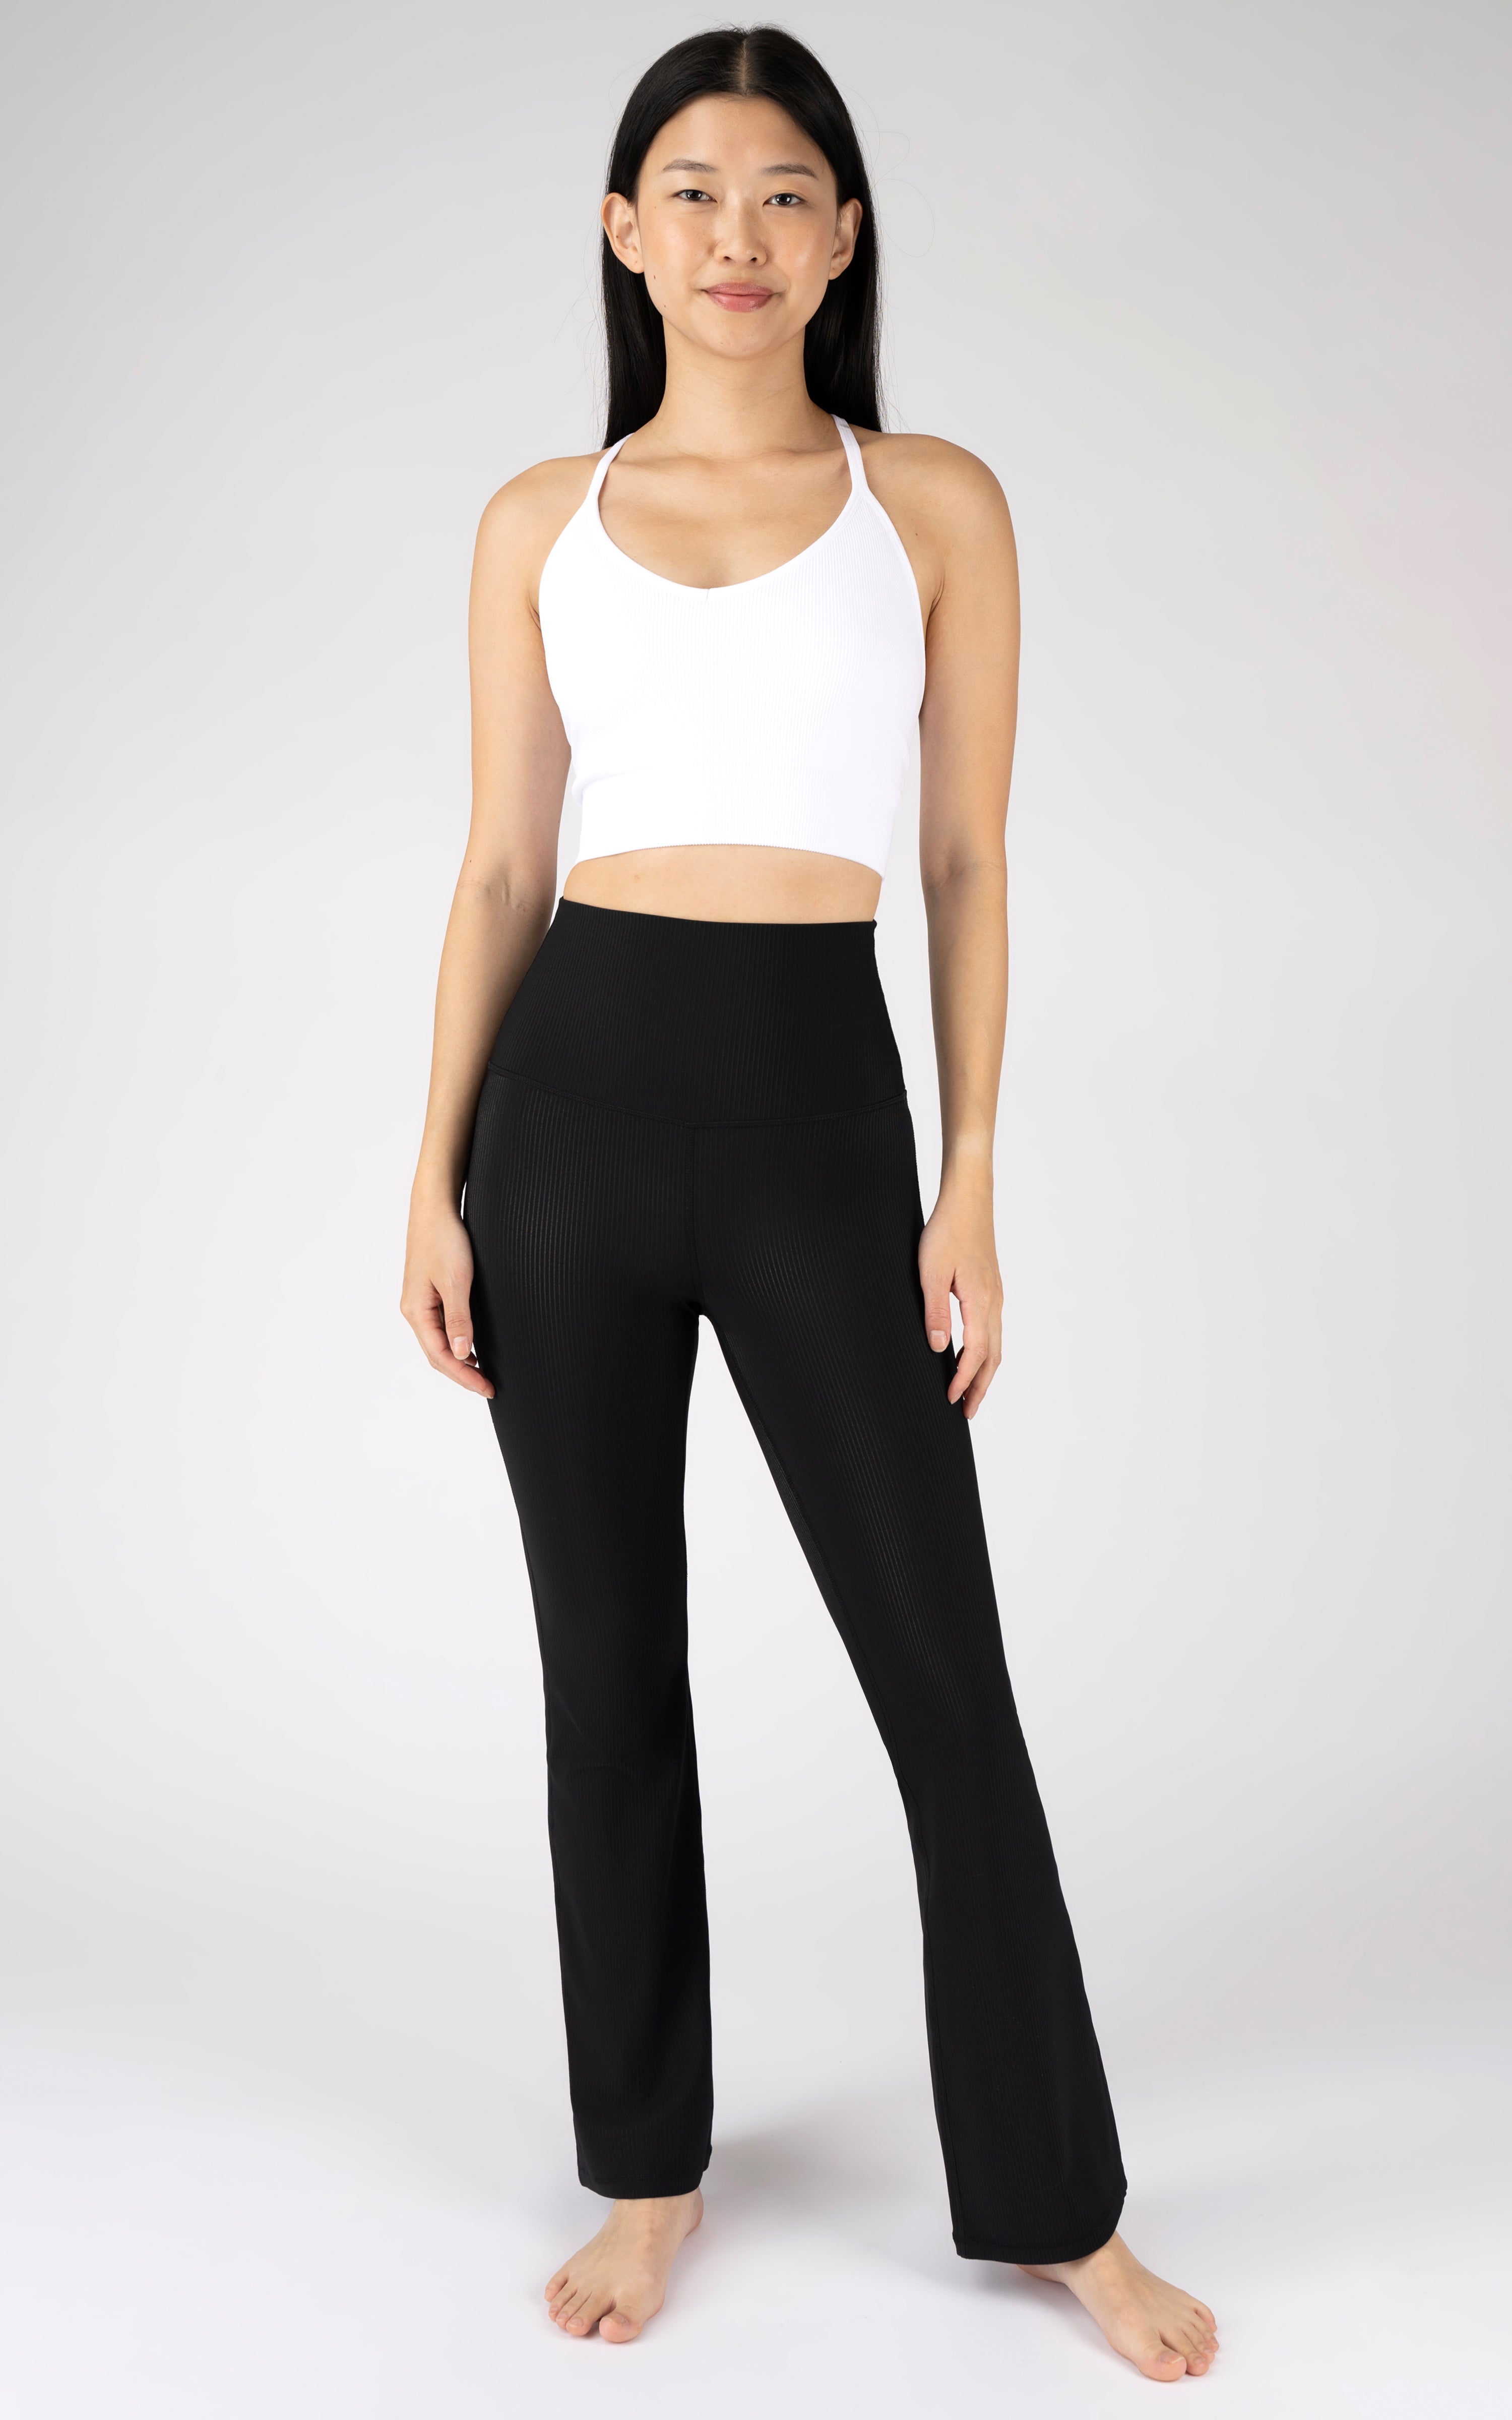 90 Degrees by Reflex black flare leggings Size M - $31 (60% Off